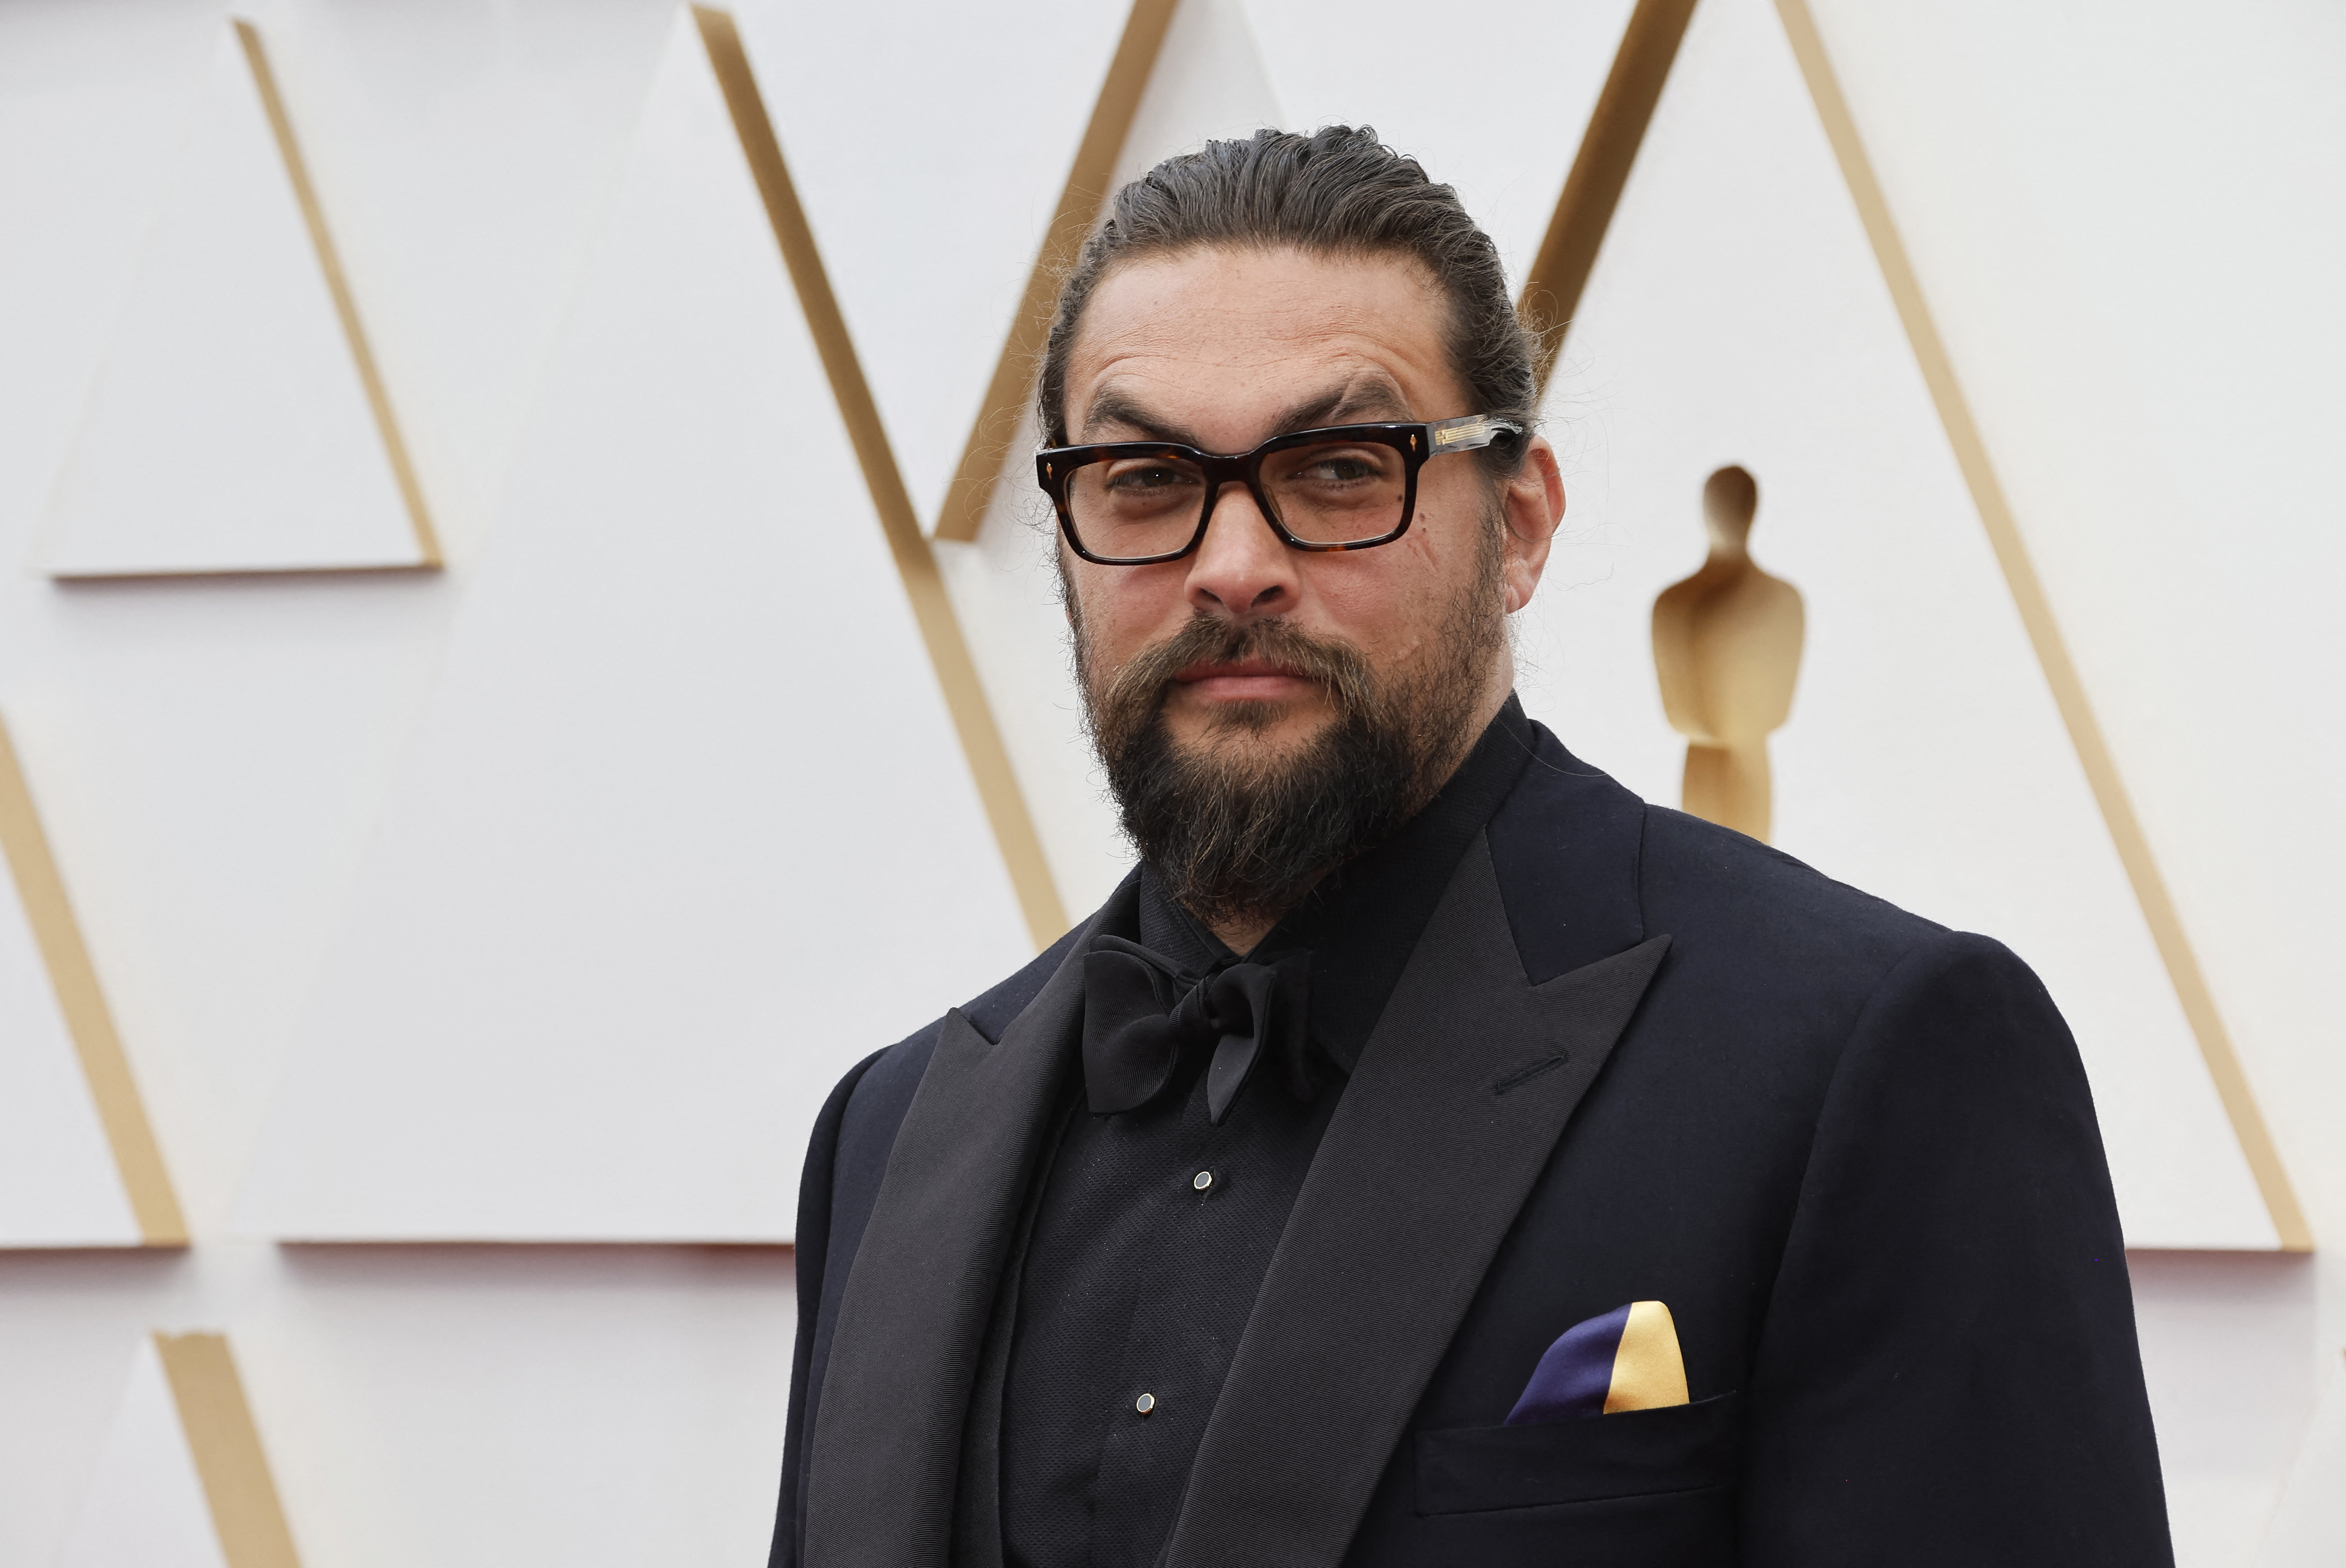 Jason Momoa wears a handkerchief in the colours of the Ukrainian flag in a show of solidarity for Ukraine as Russia's invasion of the country continues as he poses on the red carpet during the Oscars arrivals at the 94th Academy Awards in Hollywood, Los Angeles, California, U.S., March 27, 2022.